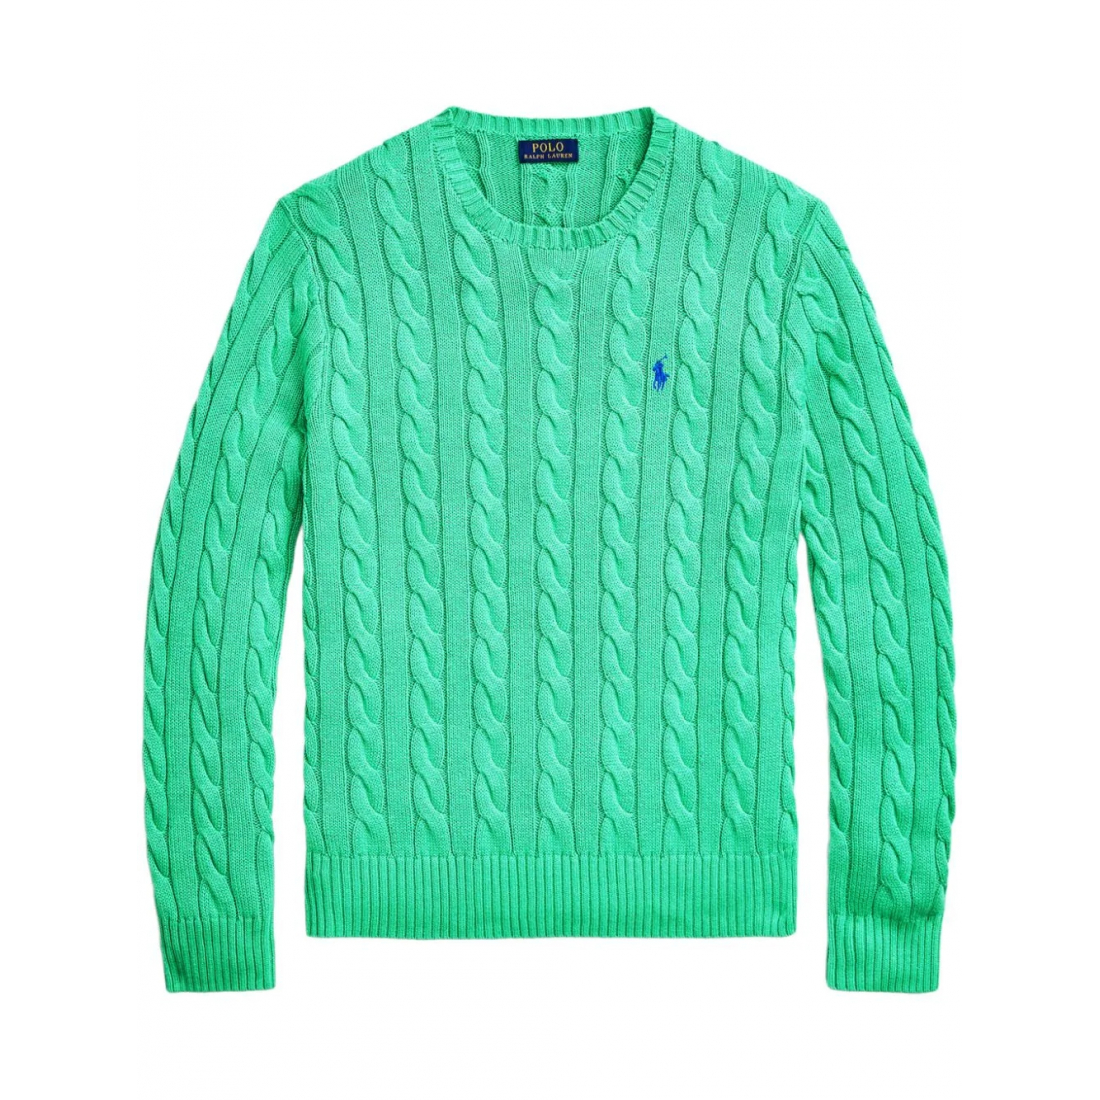 Men's 'Polo Pony Cable-Knit' Sweater